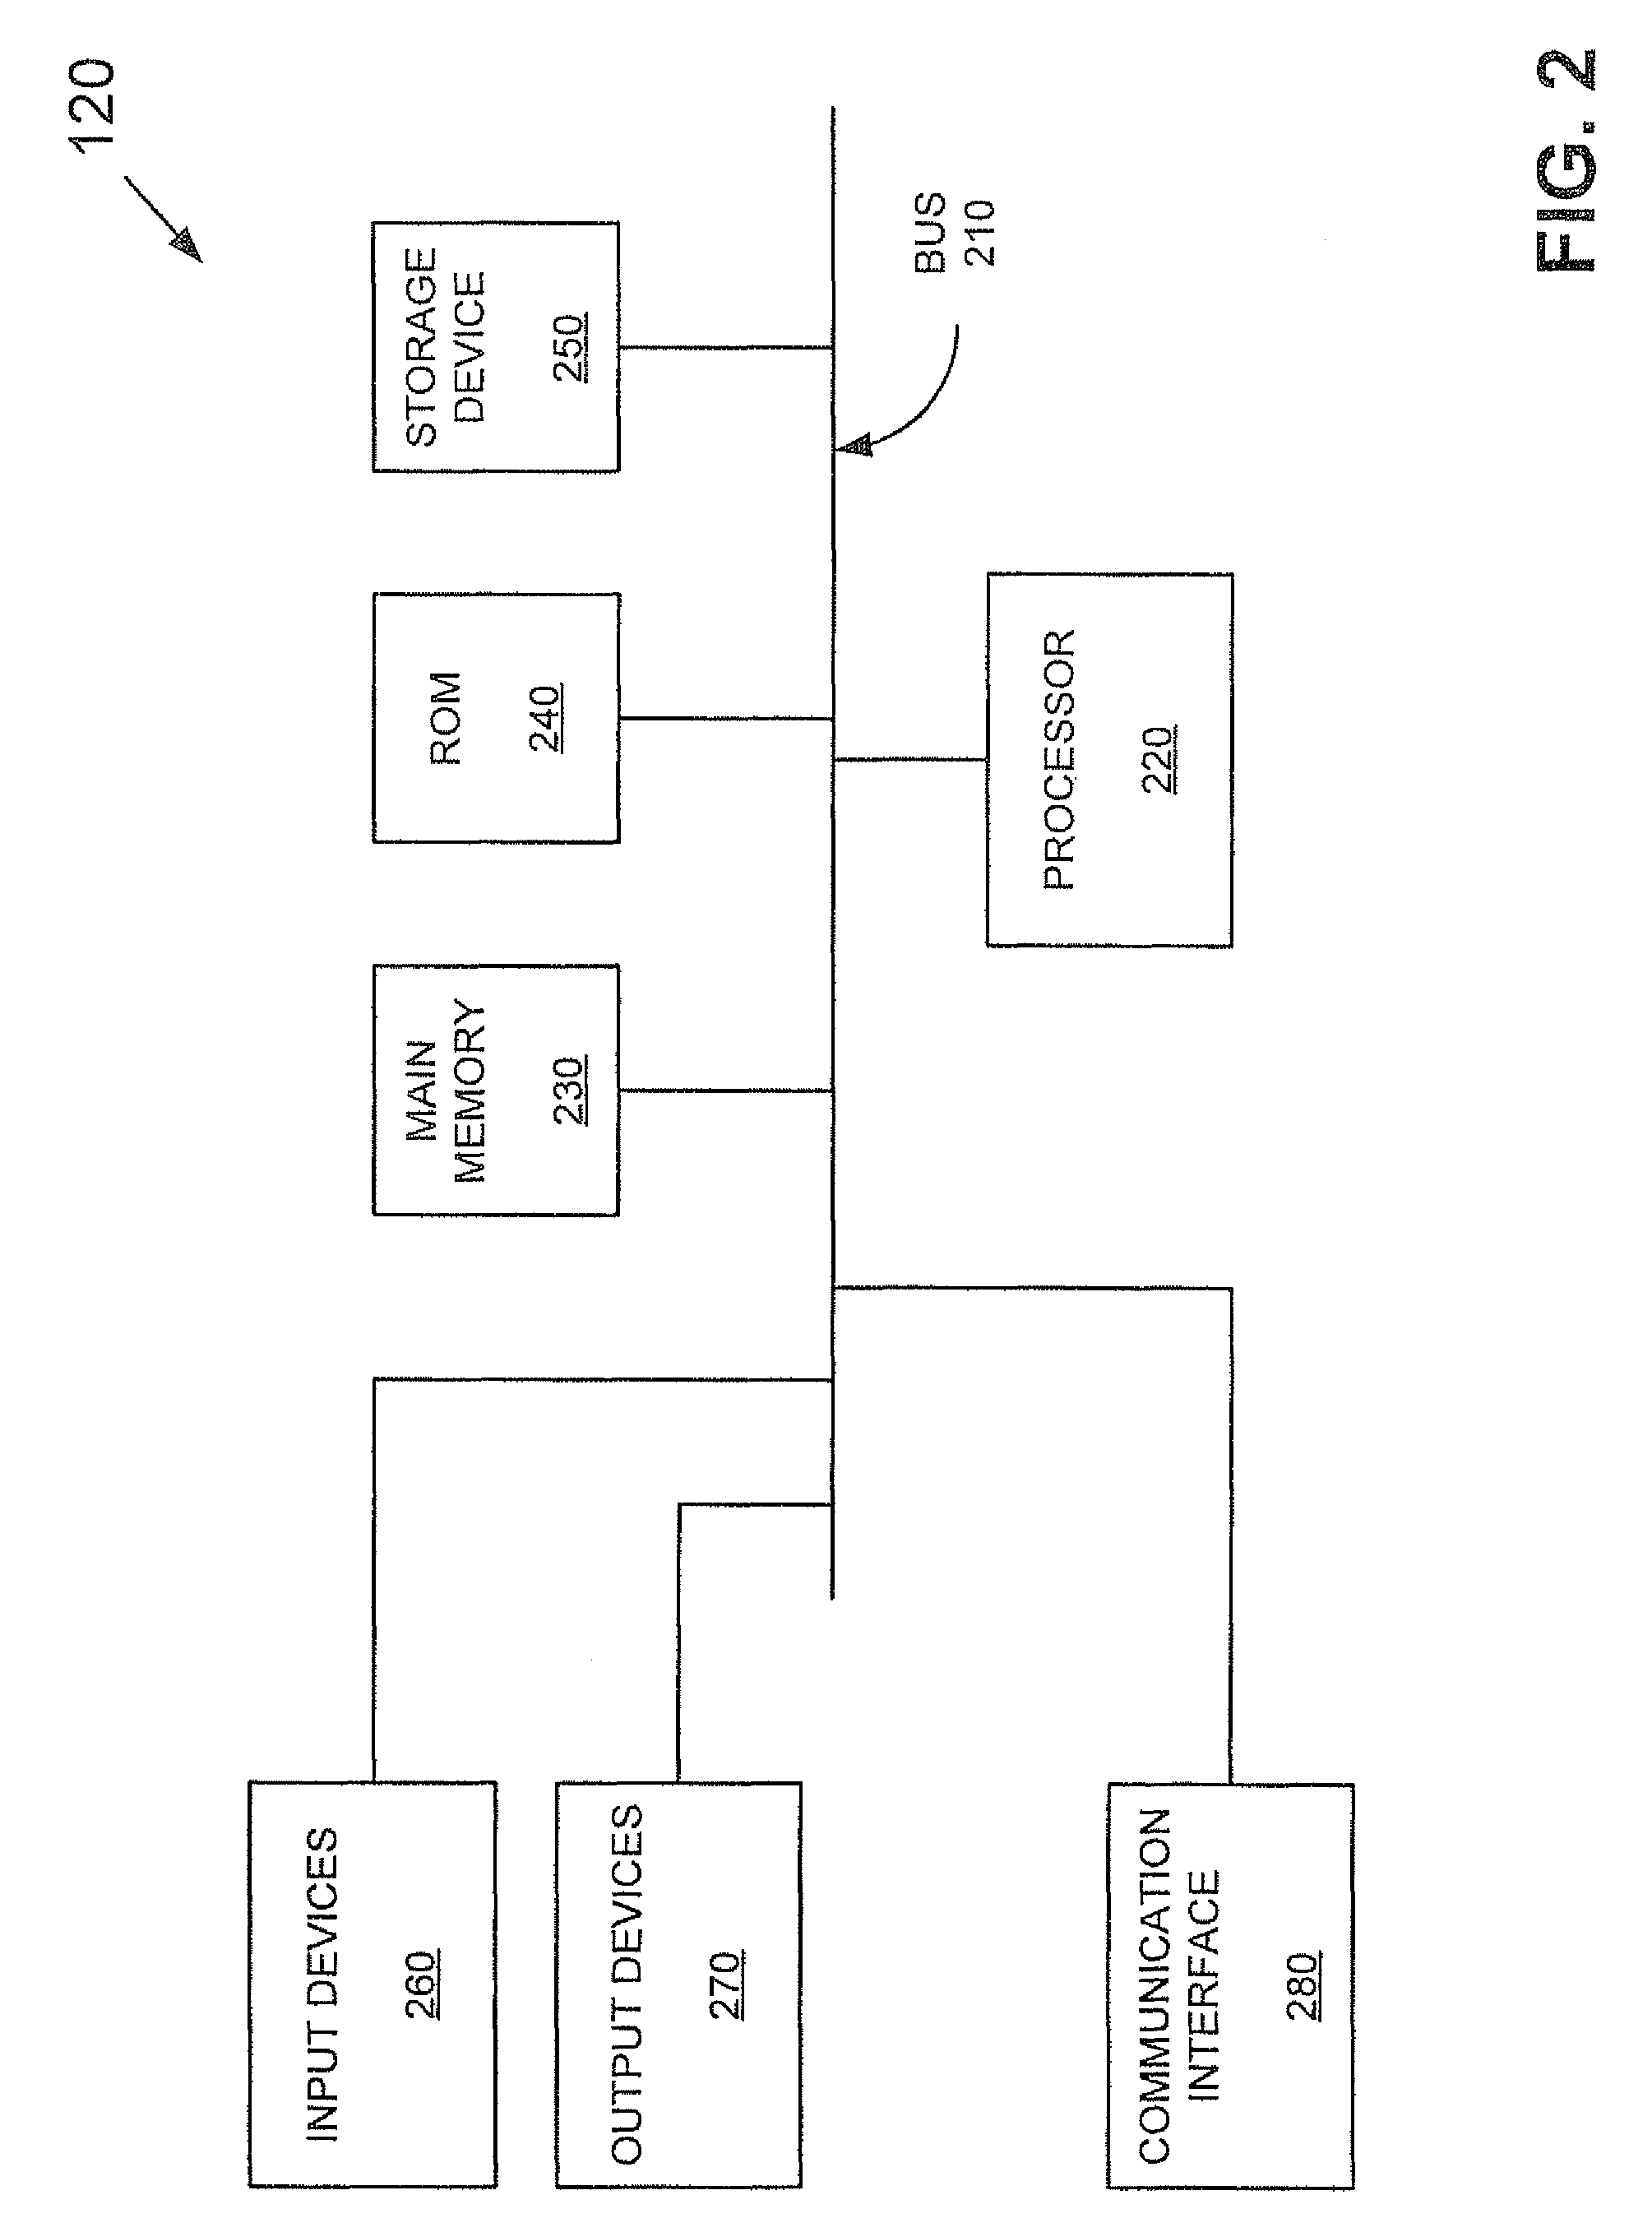 Systems and methods for detecting hidden text and hidden links